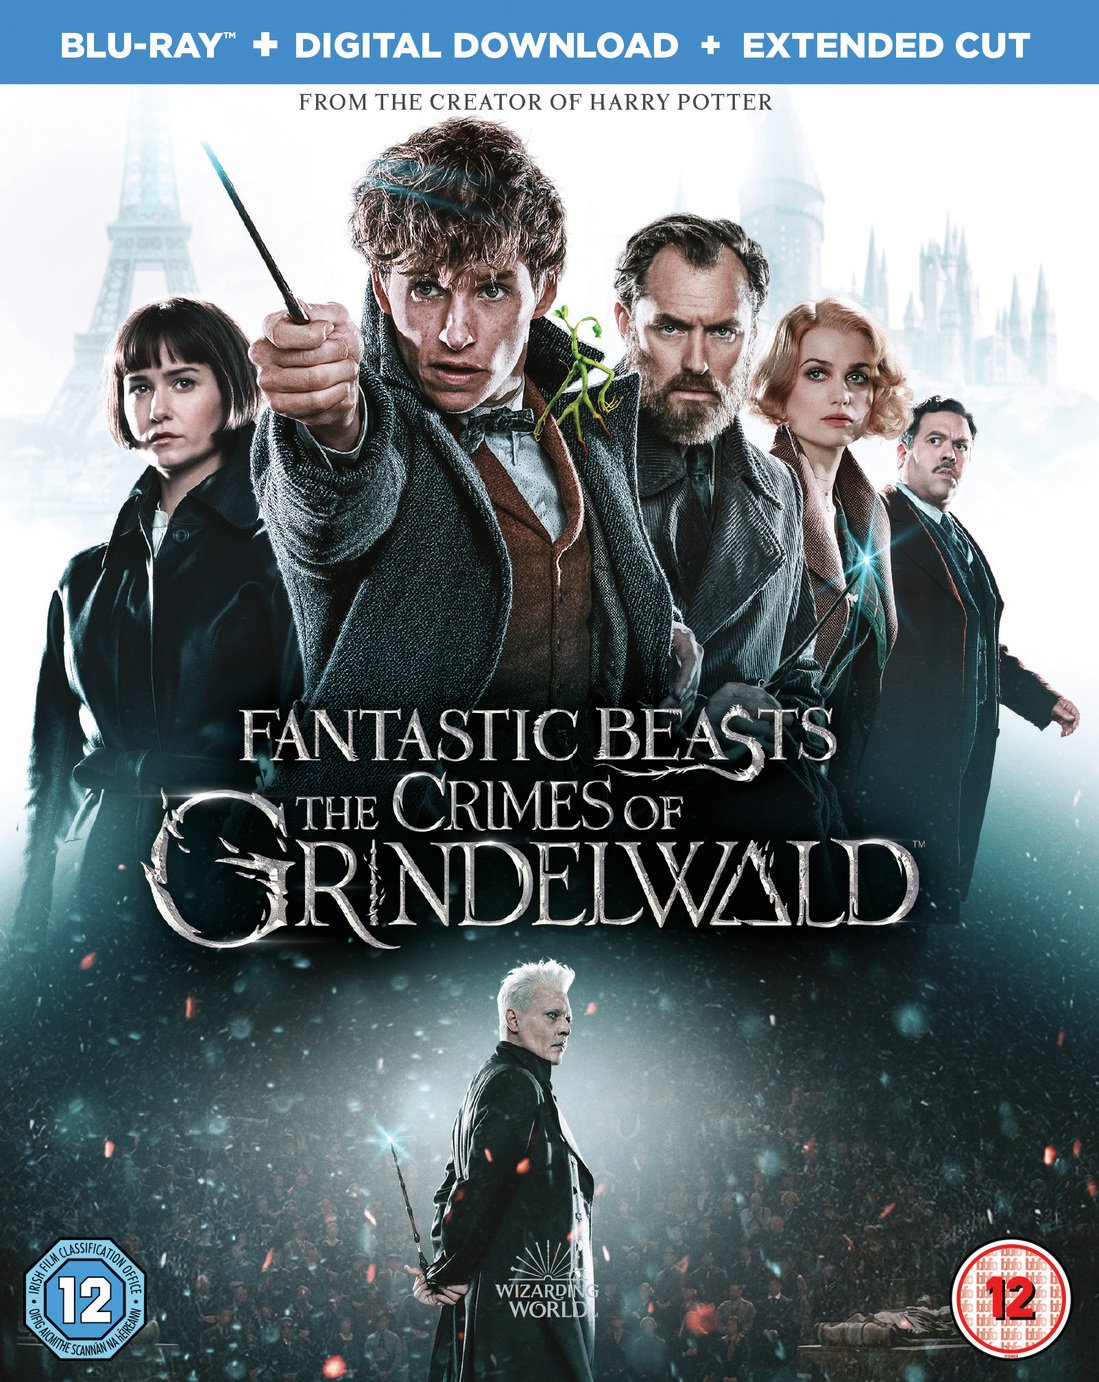 Fantastic Beasts: The Crimes of Grindelwald Blu-Ray Review